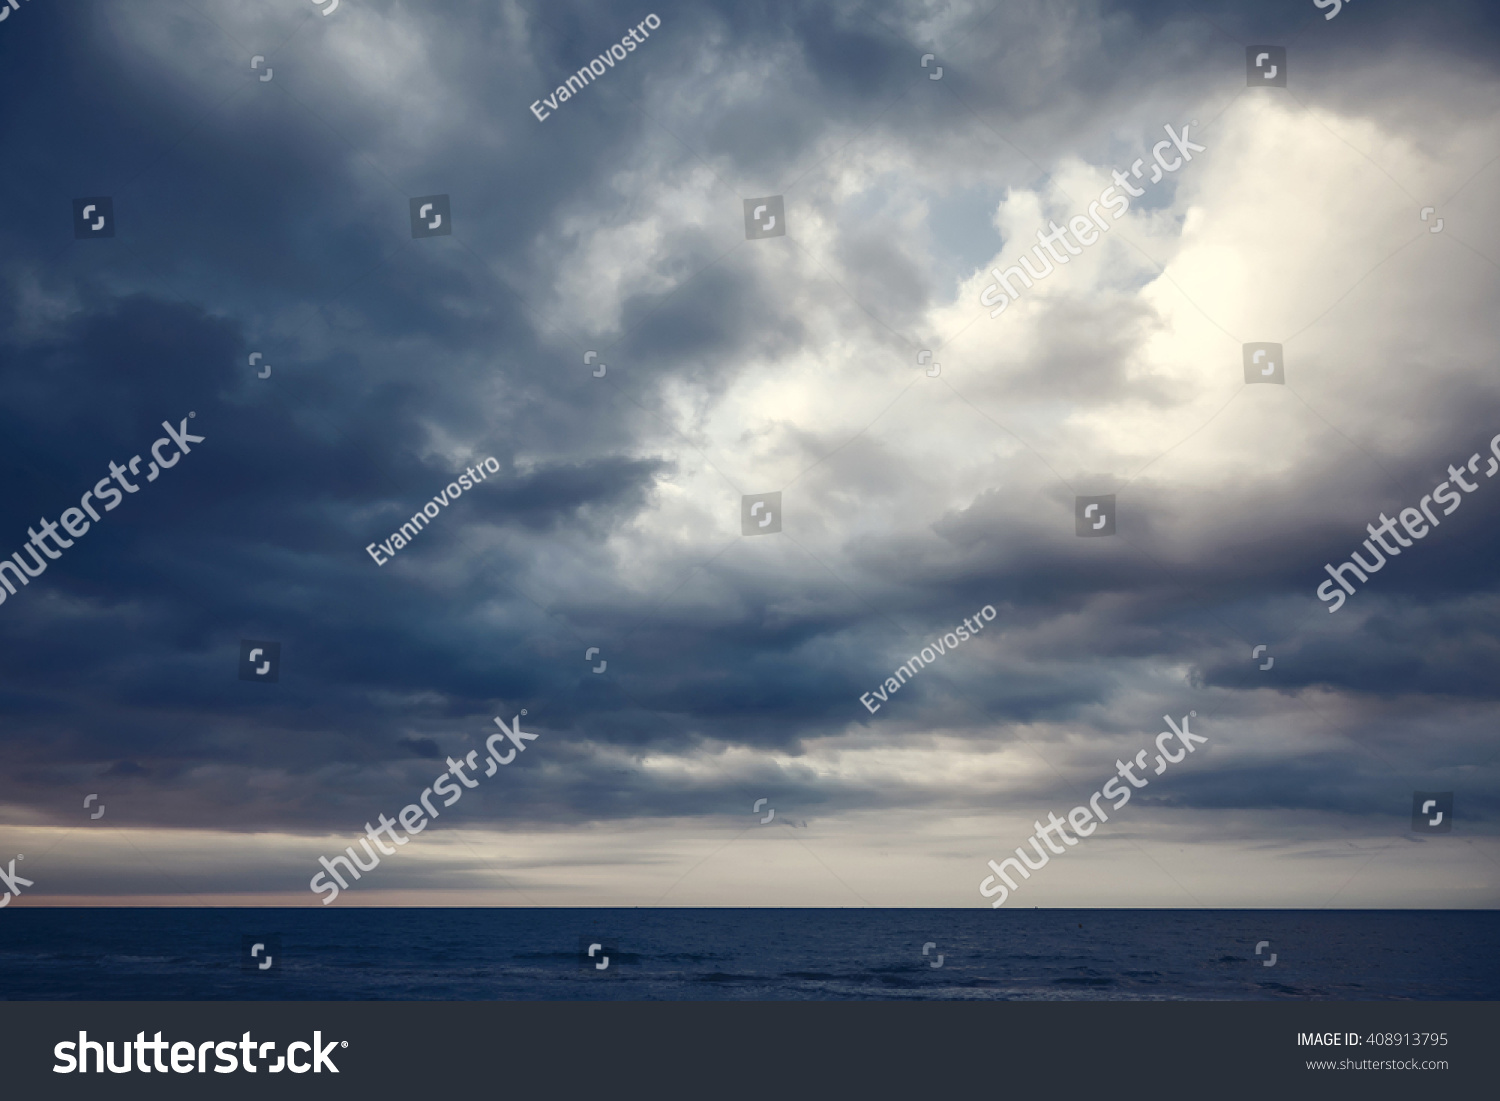 Dramatic dark cloudy sky over sea, natural photo background #408913795